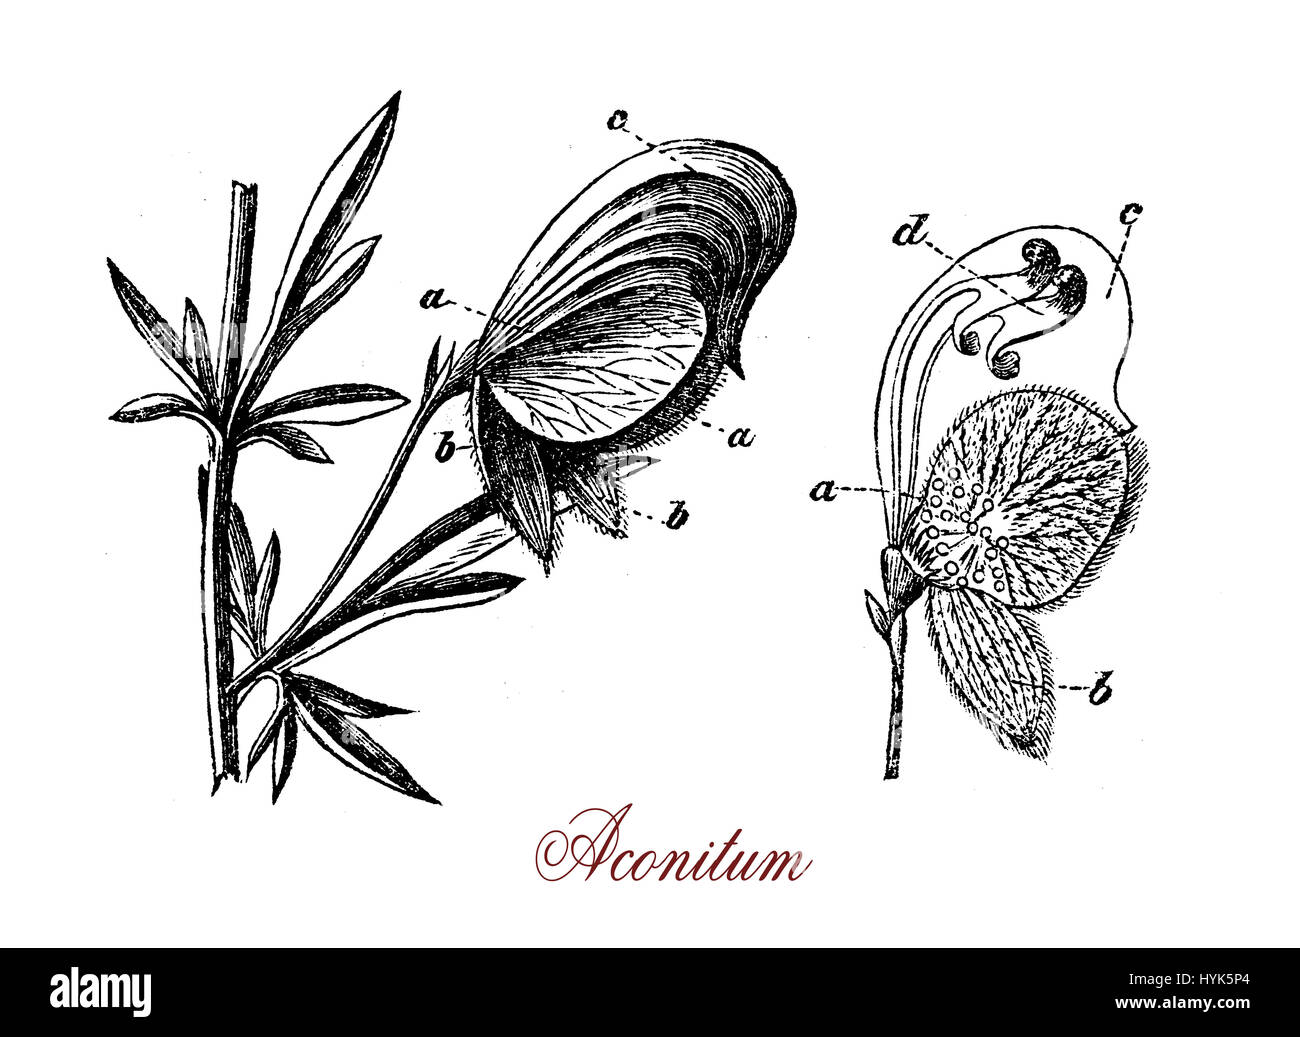 XIX century engraving of Aconitum flowering perennial plant extremely poisonous with palmated leaves, blue or purple flowers and fruits as capsules with seeds.Several species of Aconitum have been used as arrow poisons. Stock Photo